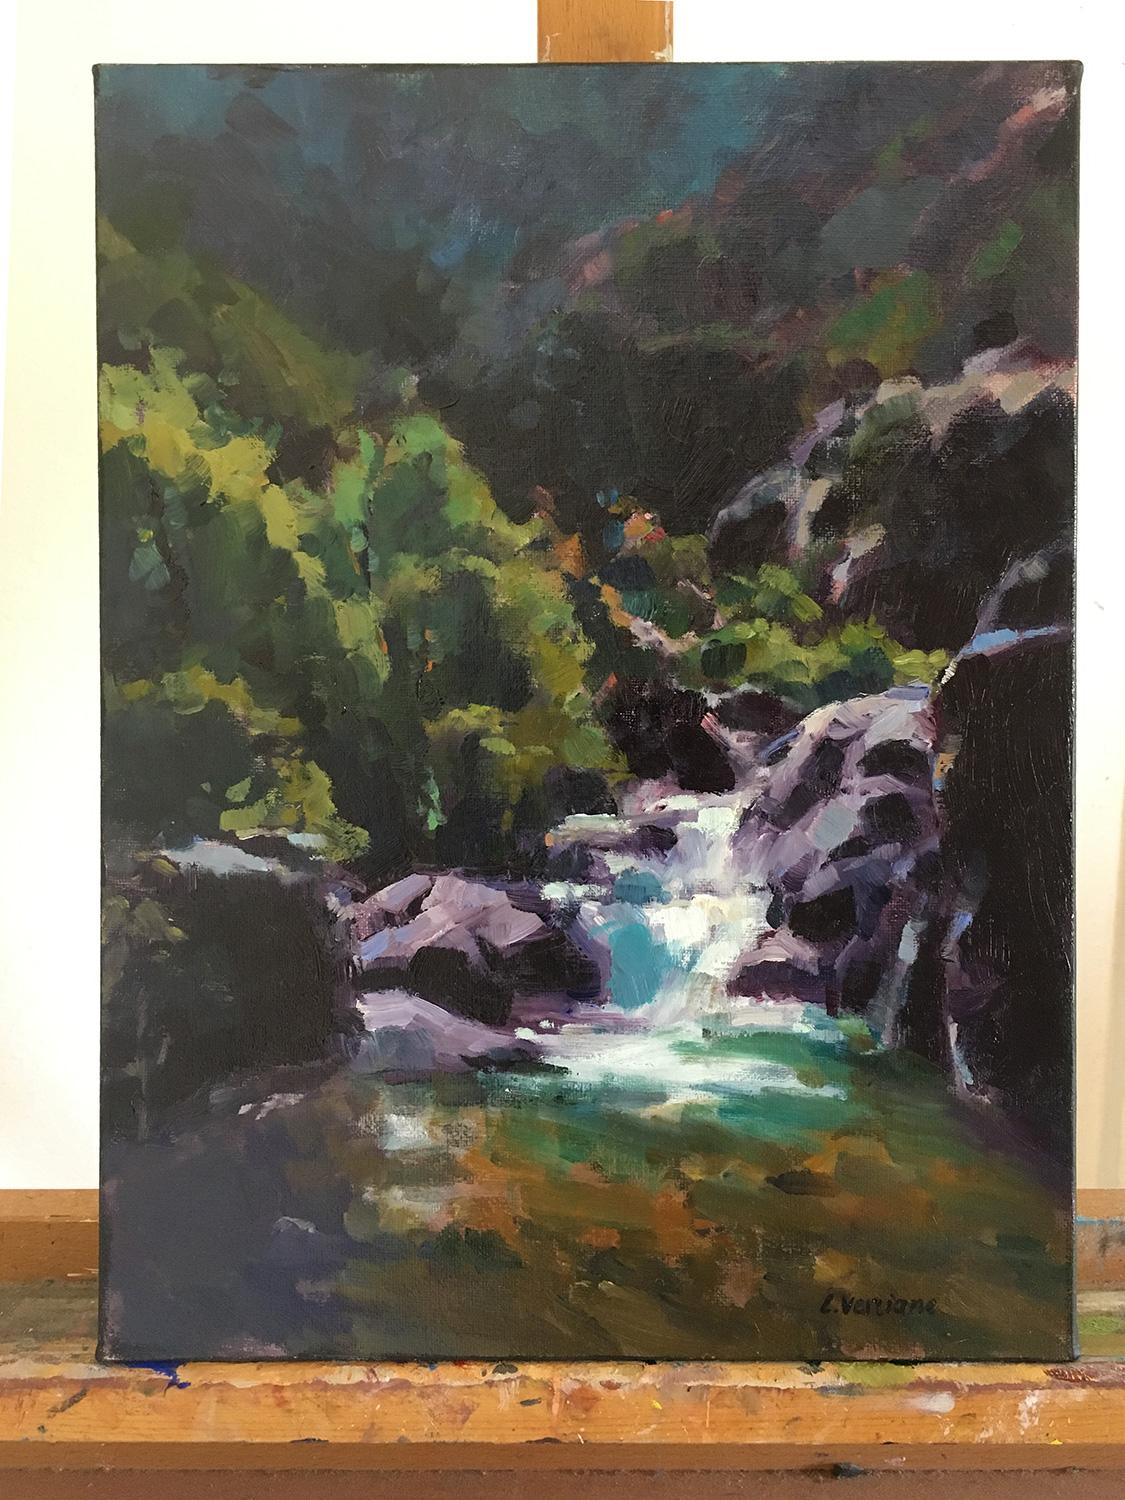 <p>Artist Comments<br />Claudia Verciani painted this impressionist scene based on a hiking trail near Los Angeles.</p><br /><p>About the Artist<br />Inspired by the great Impressionist painters, Claudia uses paint emotionally to depict the beauty